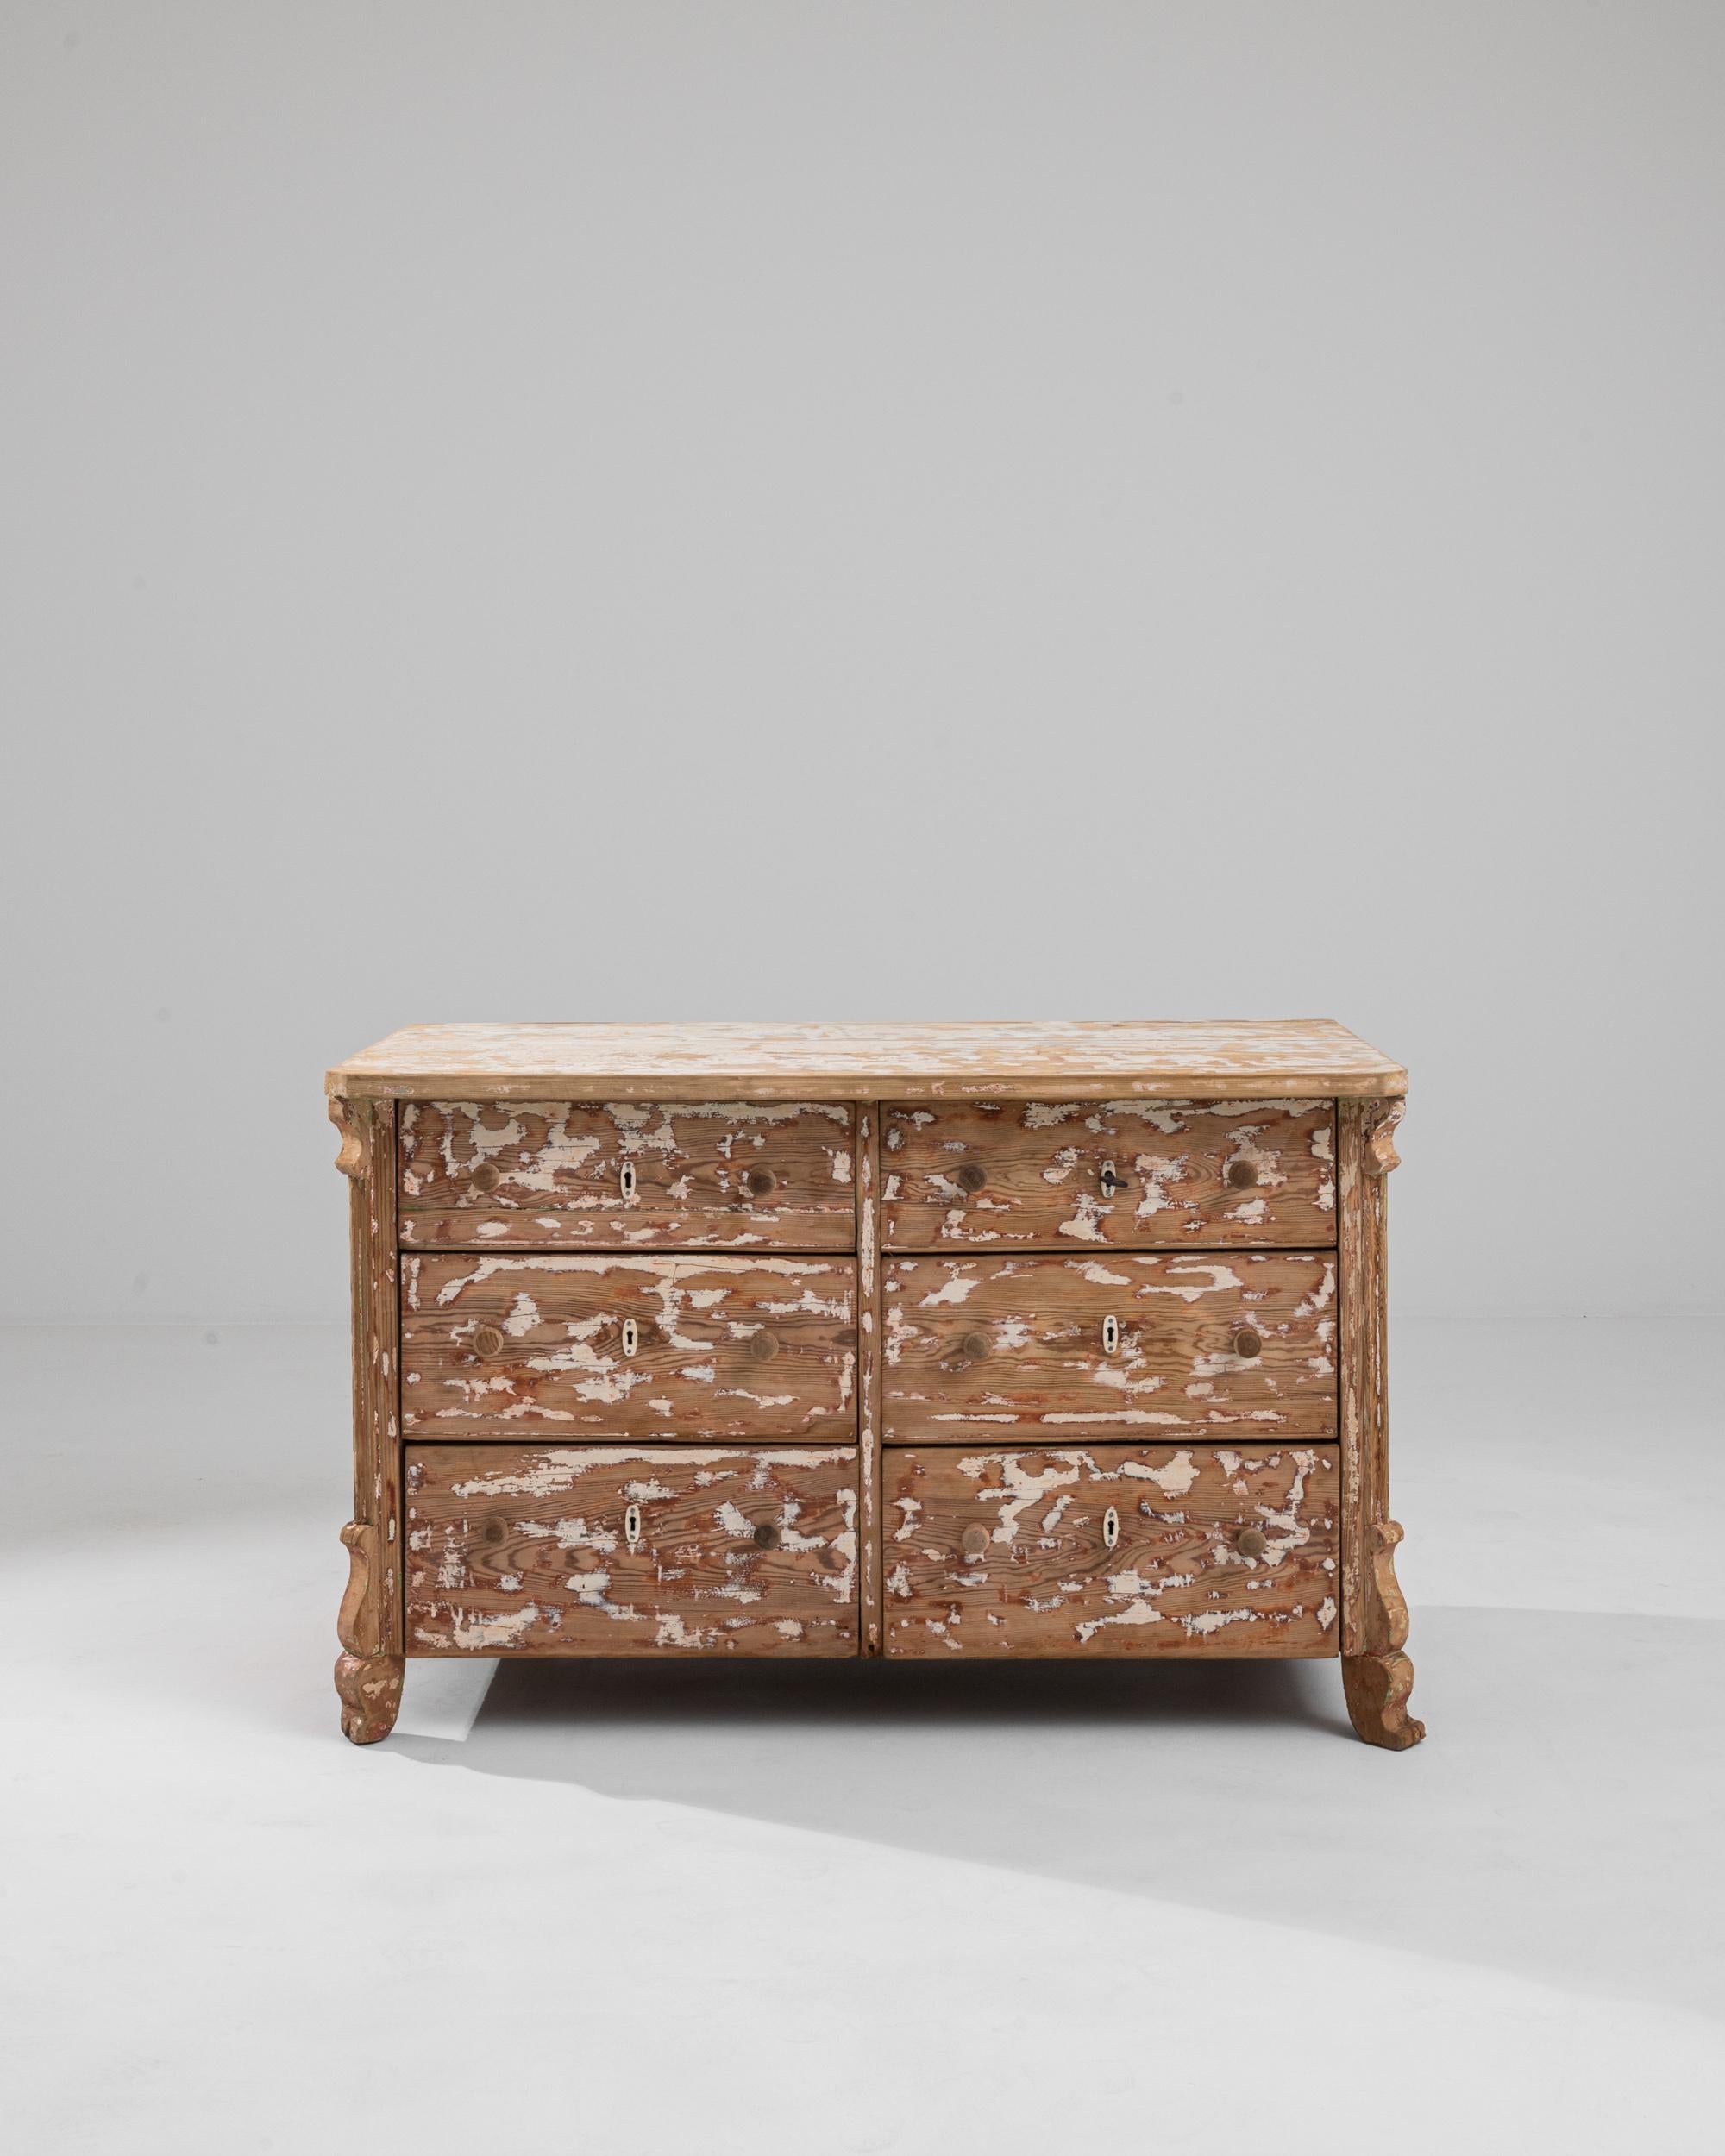 An expressive patina gives this vintage wooden chest of drawers a unique personality. Built in France at the turn of the century, the original painted finish has been scraped away to create a variegated pattern of cream and russet patches atop the